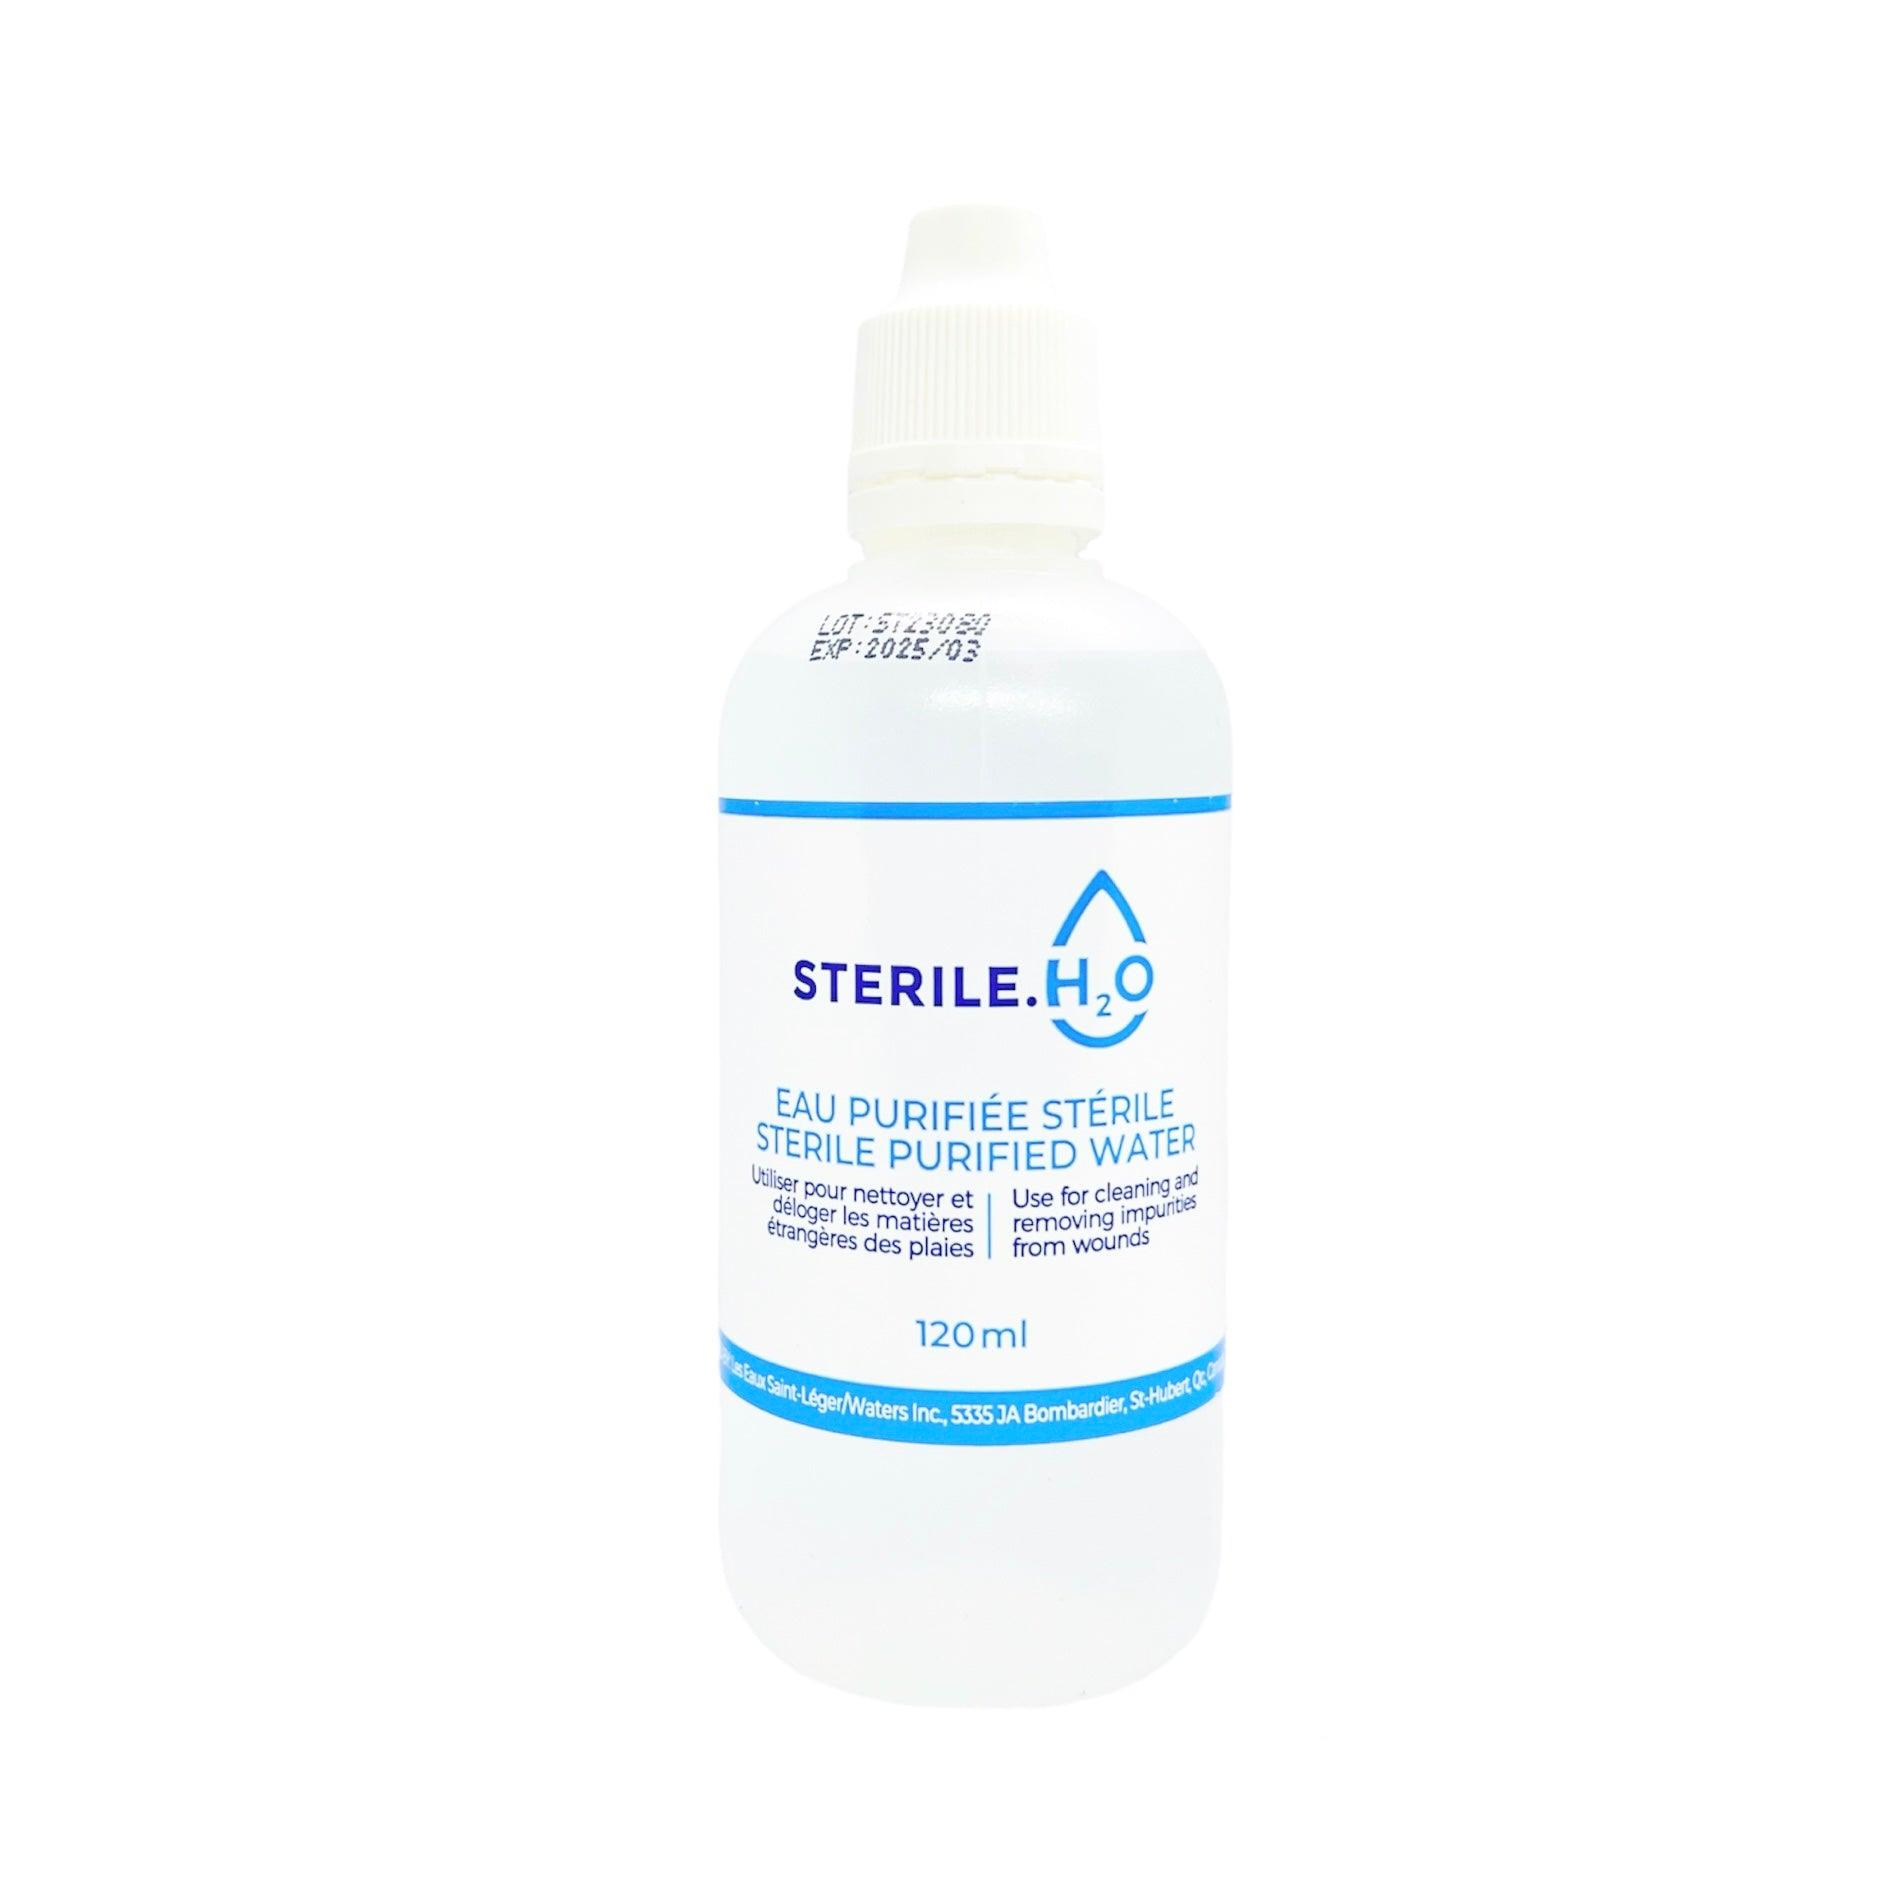 Sterile H2O - Sterile Purified Water for Irrigation 120mL (24Bottles)